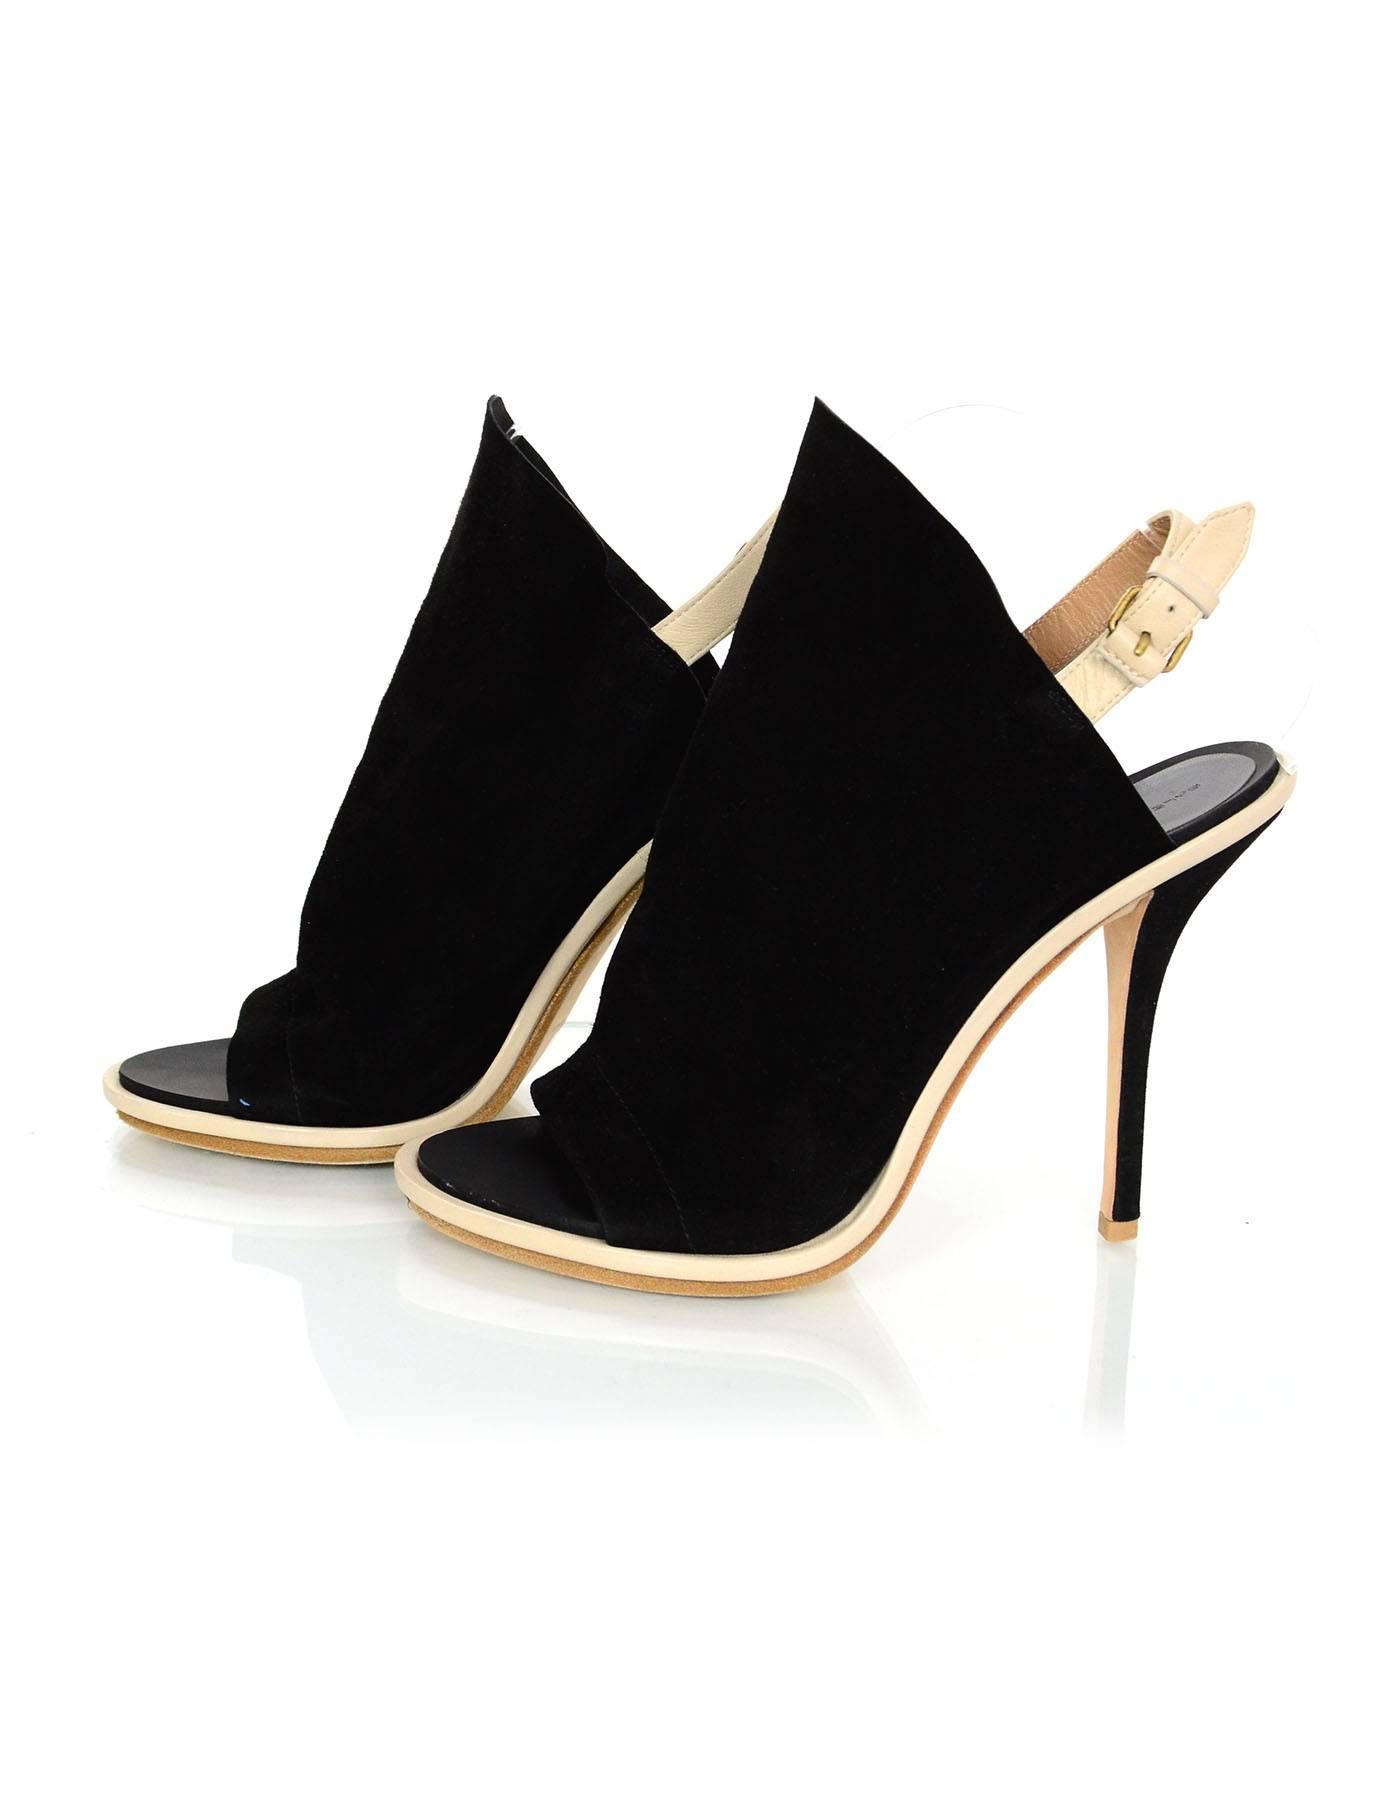 Balenciaga Black Suede Glove Open-Toe Sandals Sz 39

Made In: Italy
Color: Black and cream
Materials: Suede, leather
Closure/Opening: Buckle closure at ankle 
Sole Stamp: Balenciaga 39 Made in Italy
Retail Price: $735 + tax
Overall